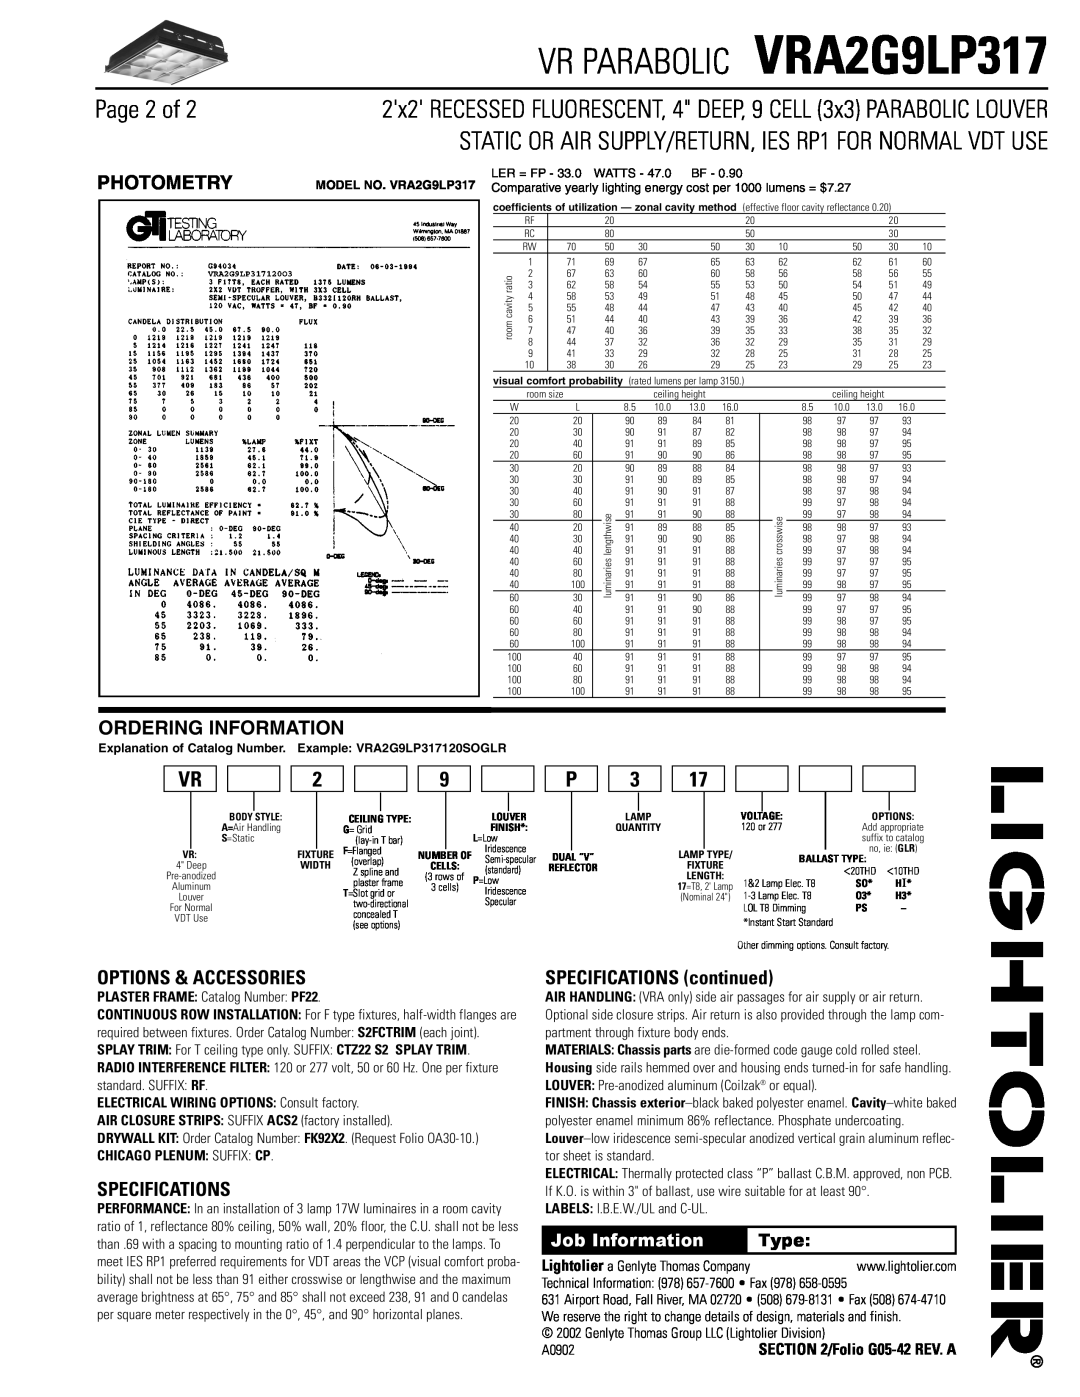 Lightolier VRA2G9LP317 Page 2 of, Options & Accessories, Specifications, SPECIFICATIONS continued, Photometry, Type 